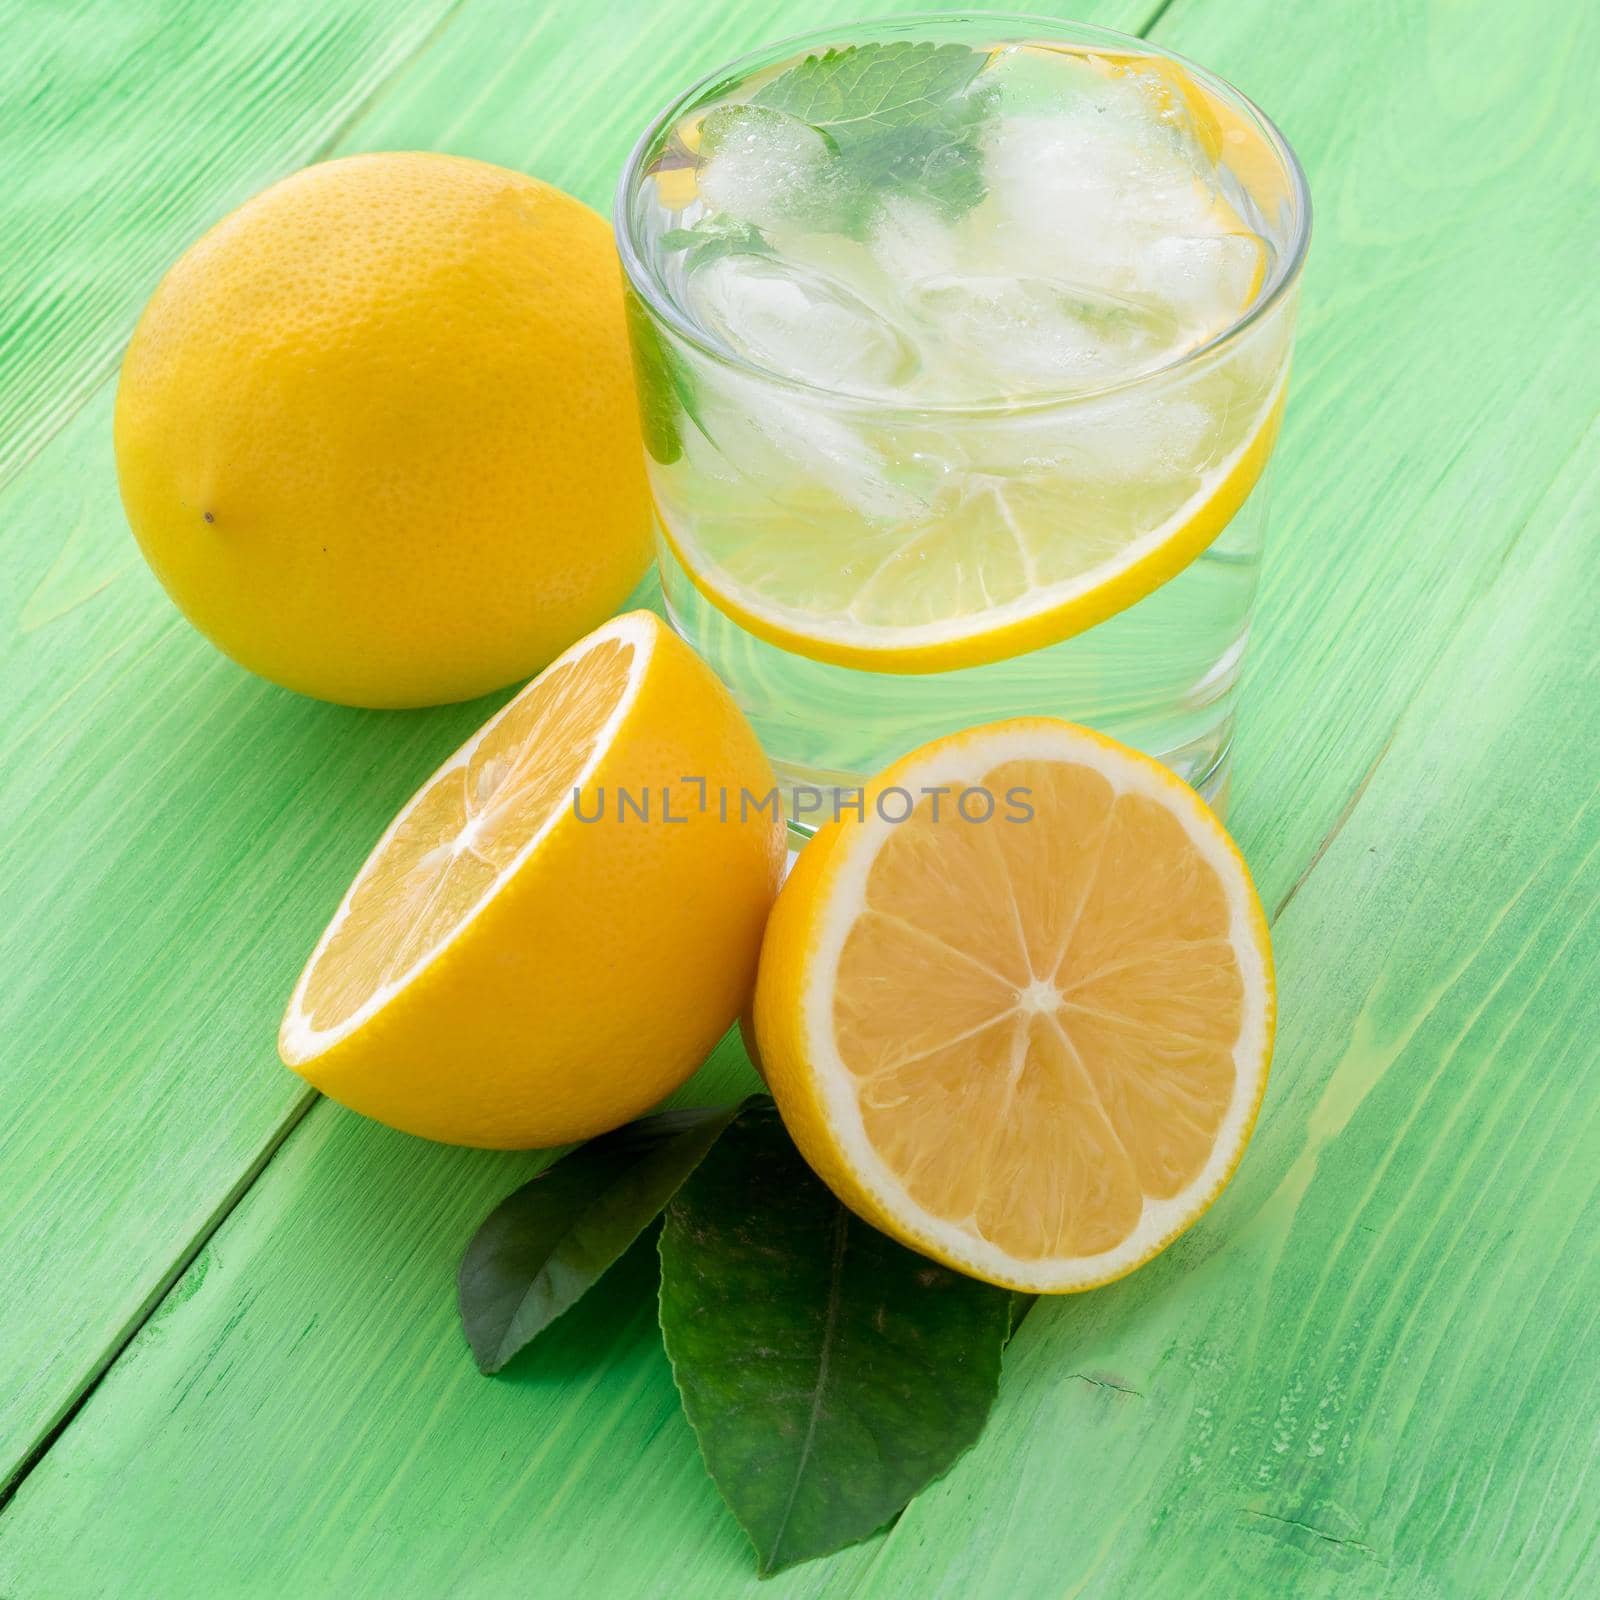 Lemonade in a glass, a lemon half, fresh leaves on the green table. A refreshing cold drink of water with ice, mint and slices of lemon, side view